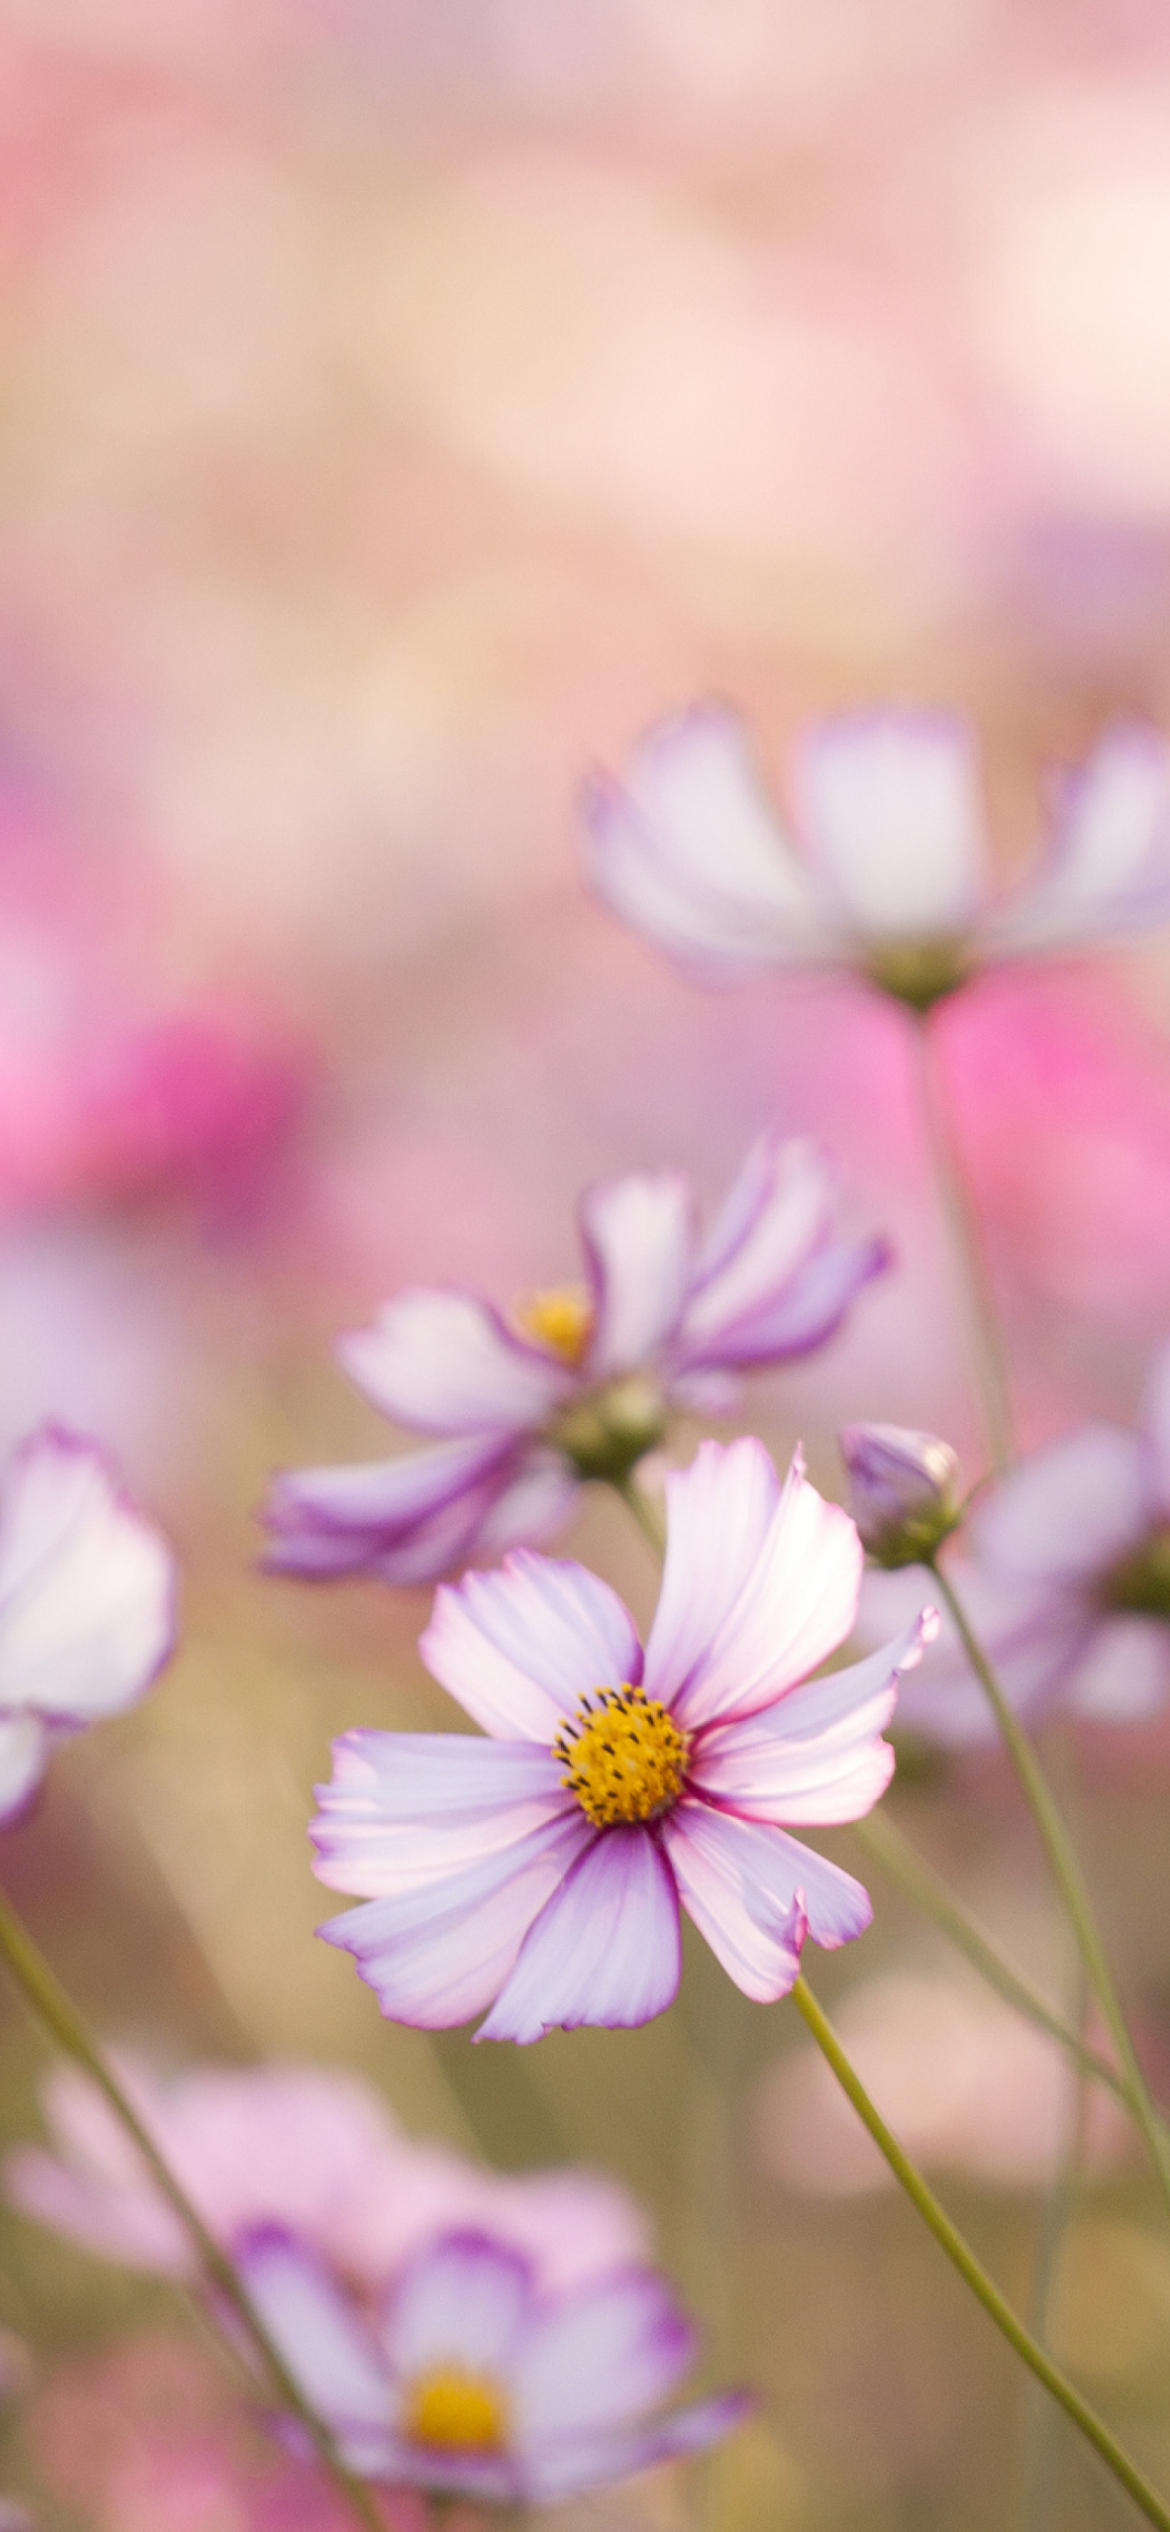 Field Of White And Pink Petals wallpaper 1170x2532